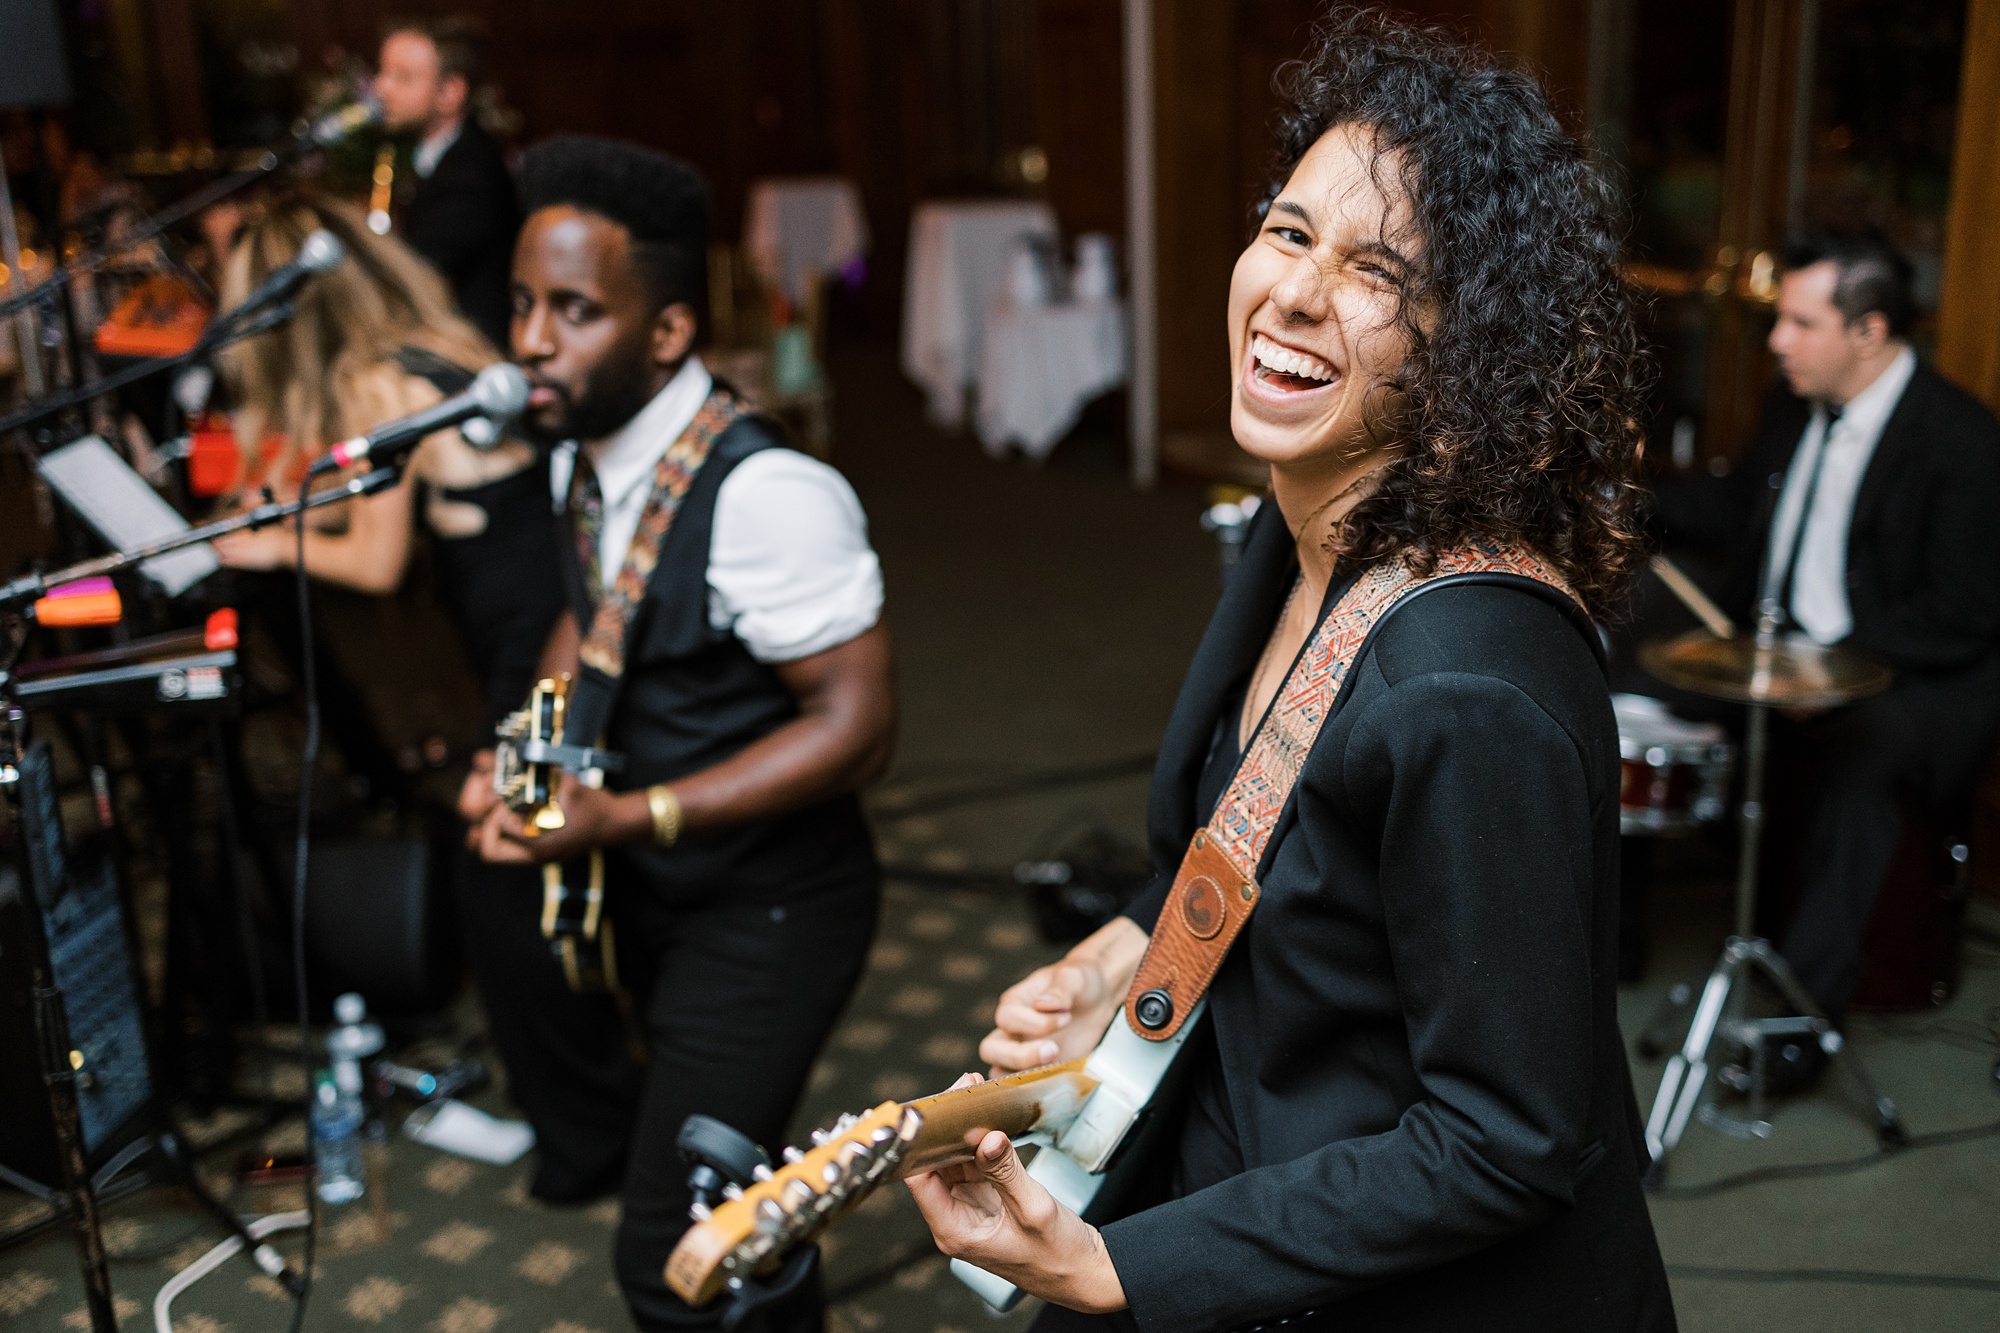 wedding reception at Skytop Lodge with live band